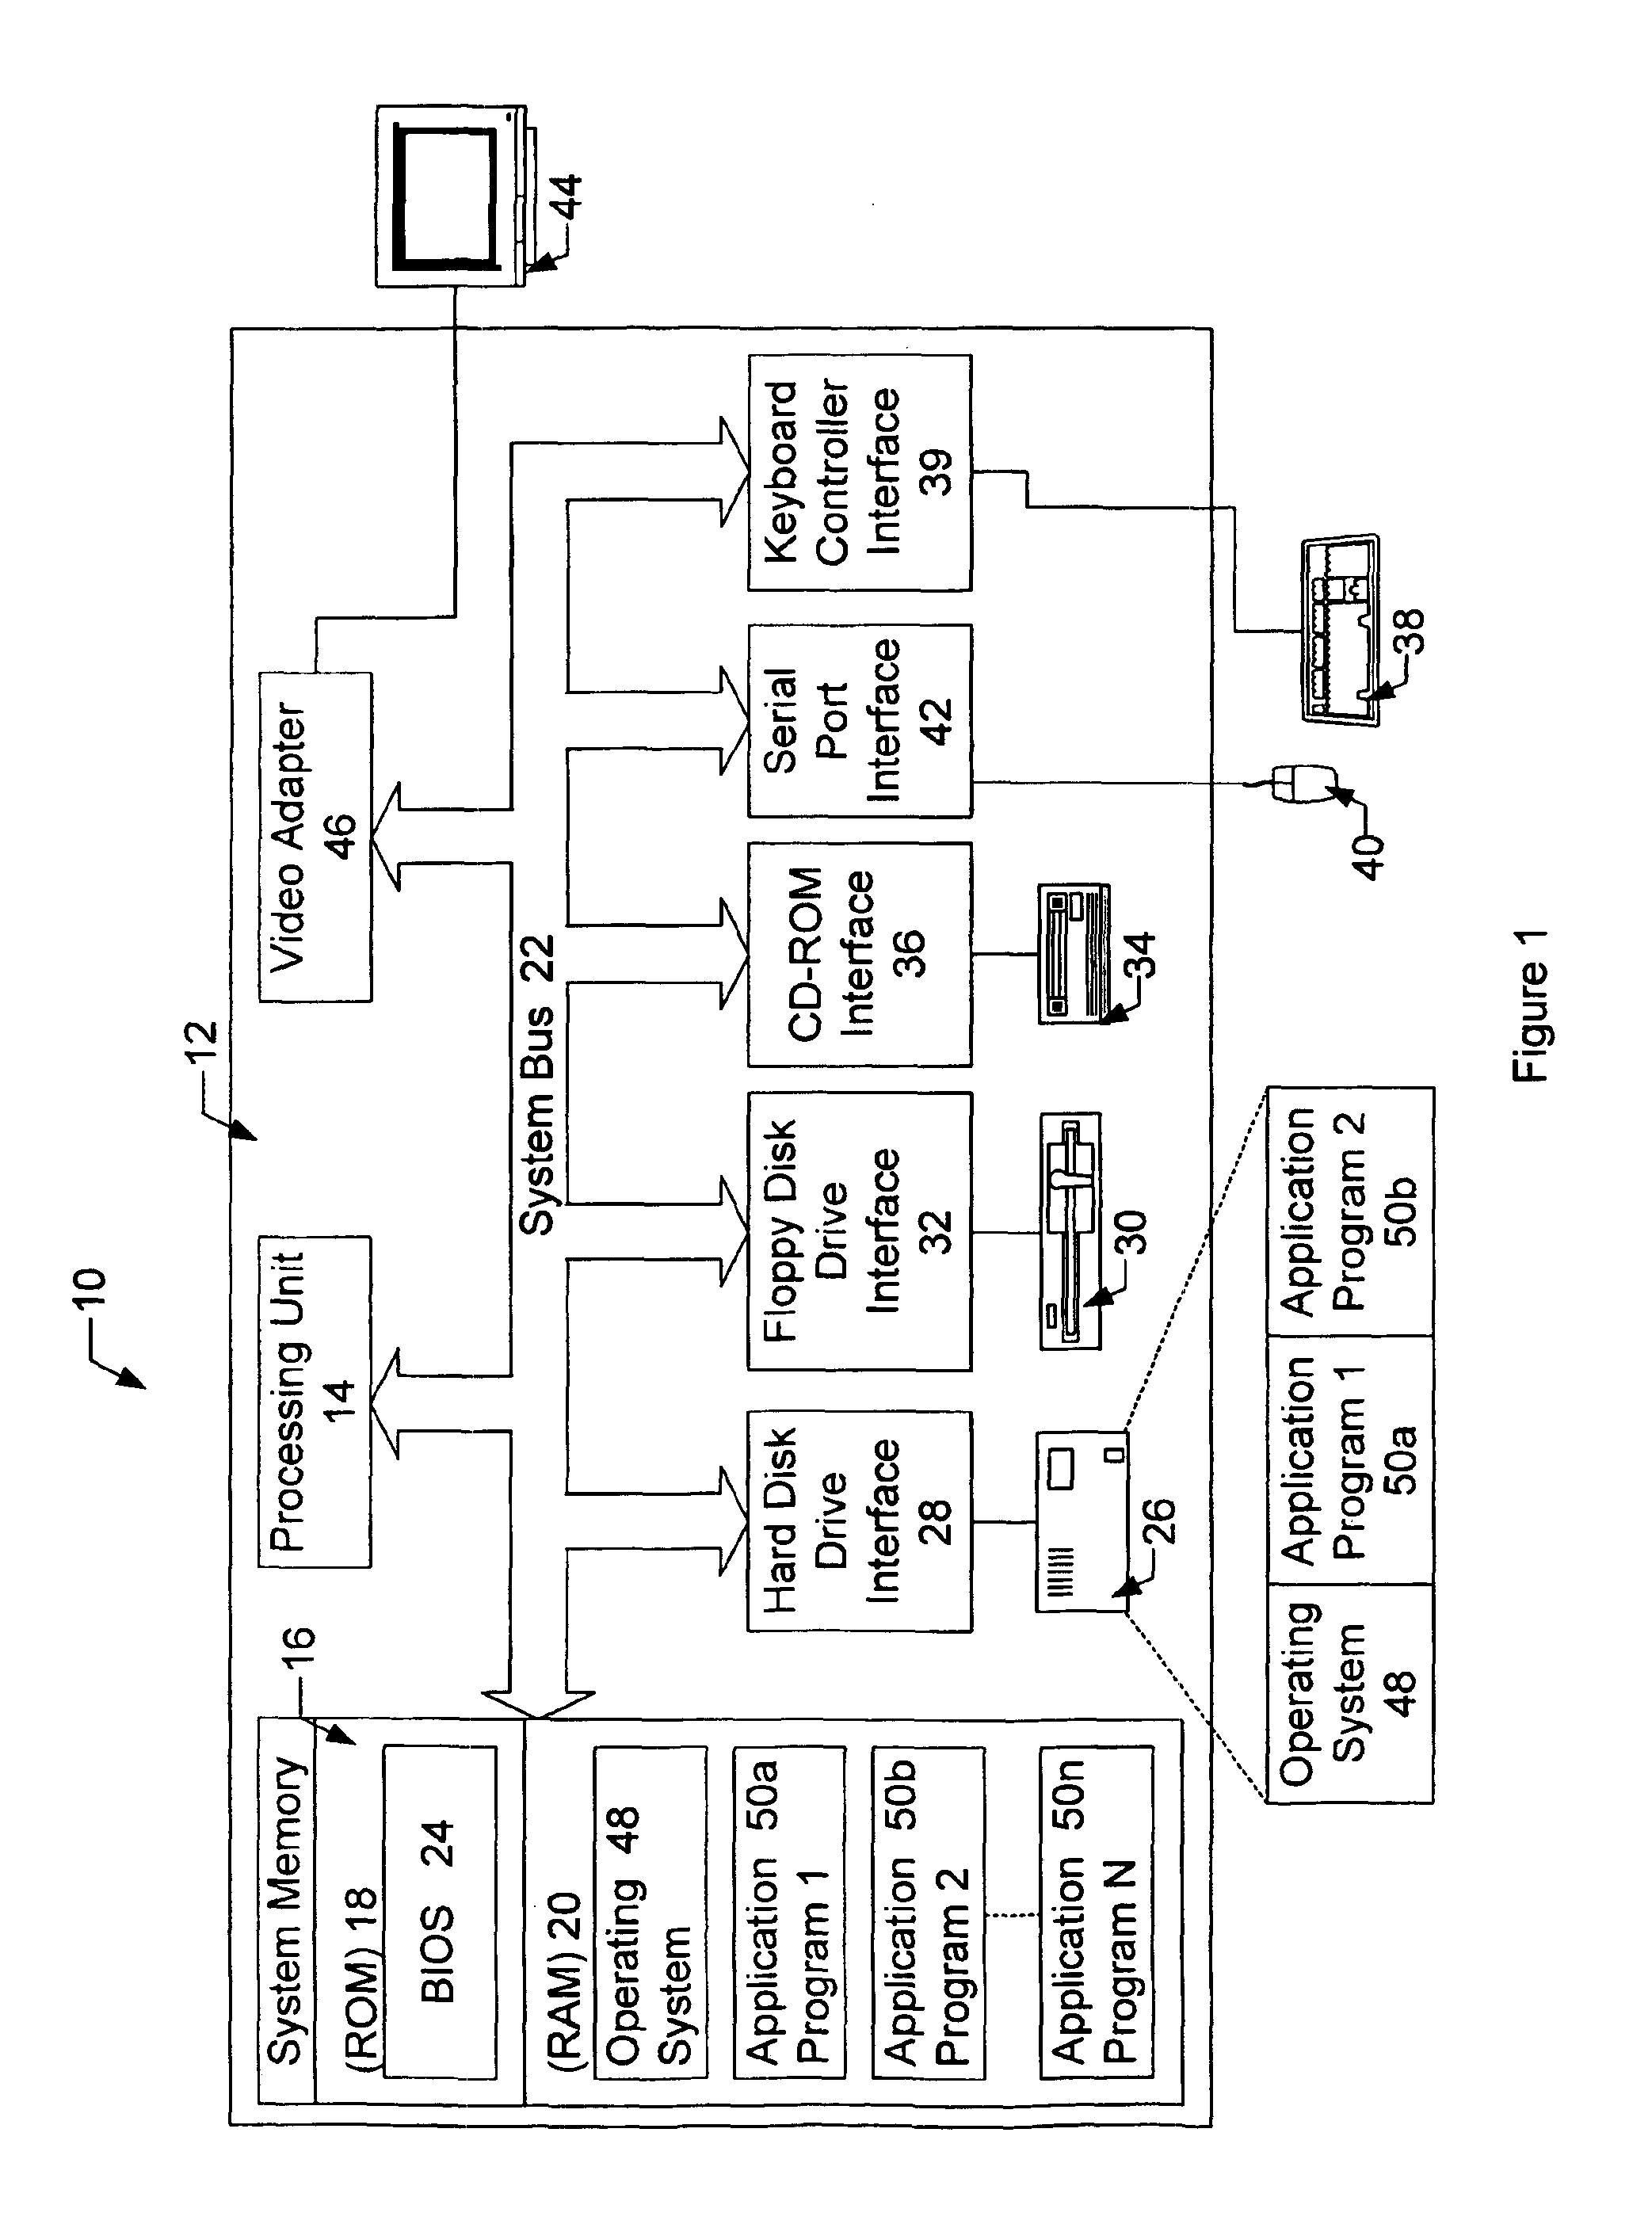 Systems, methods, and computer program products for managing the display of information output by a computer program